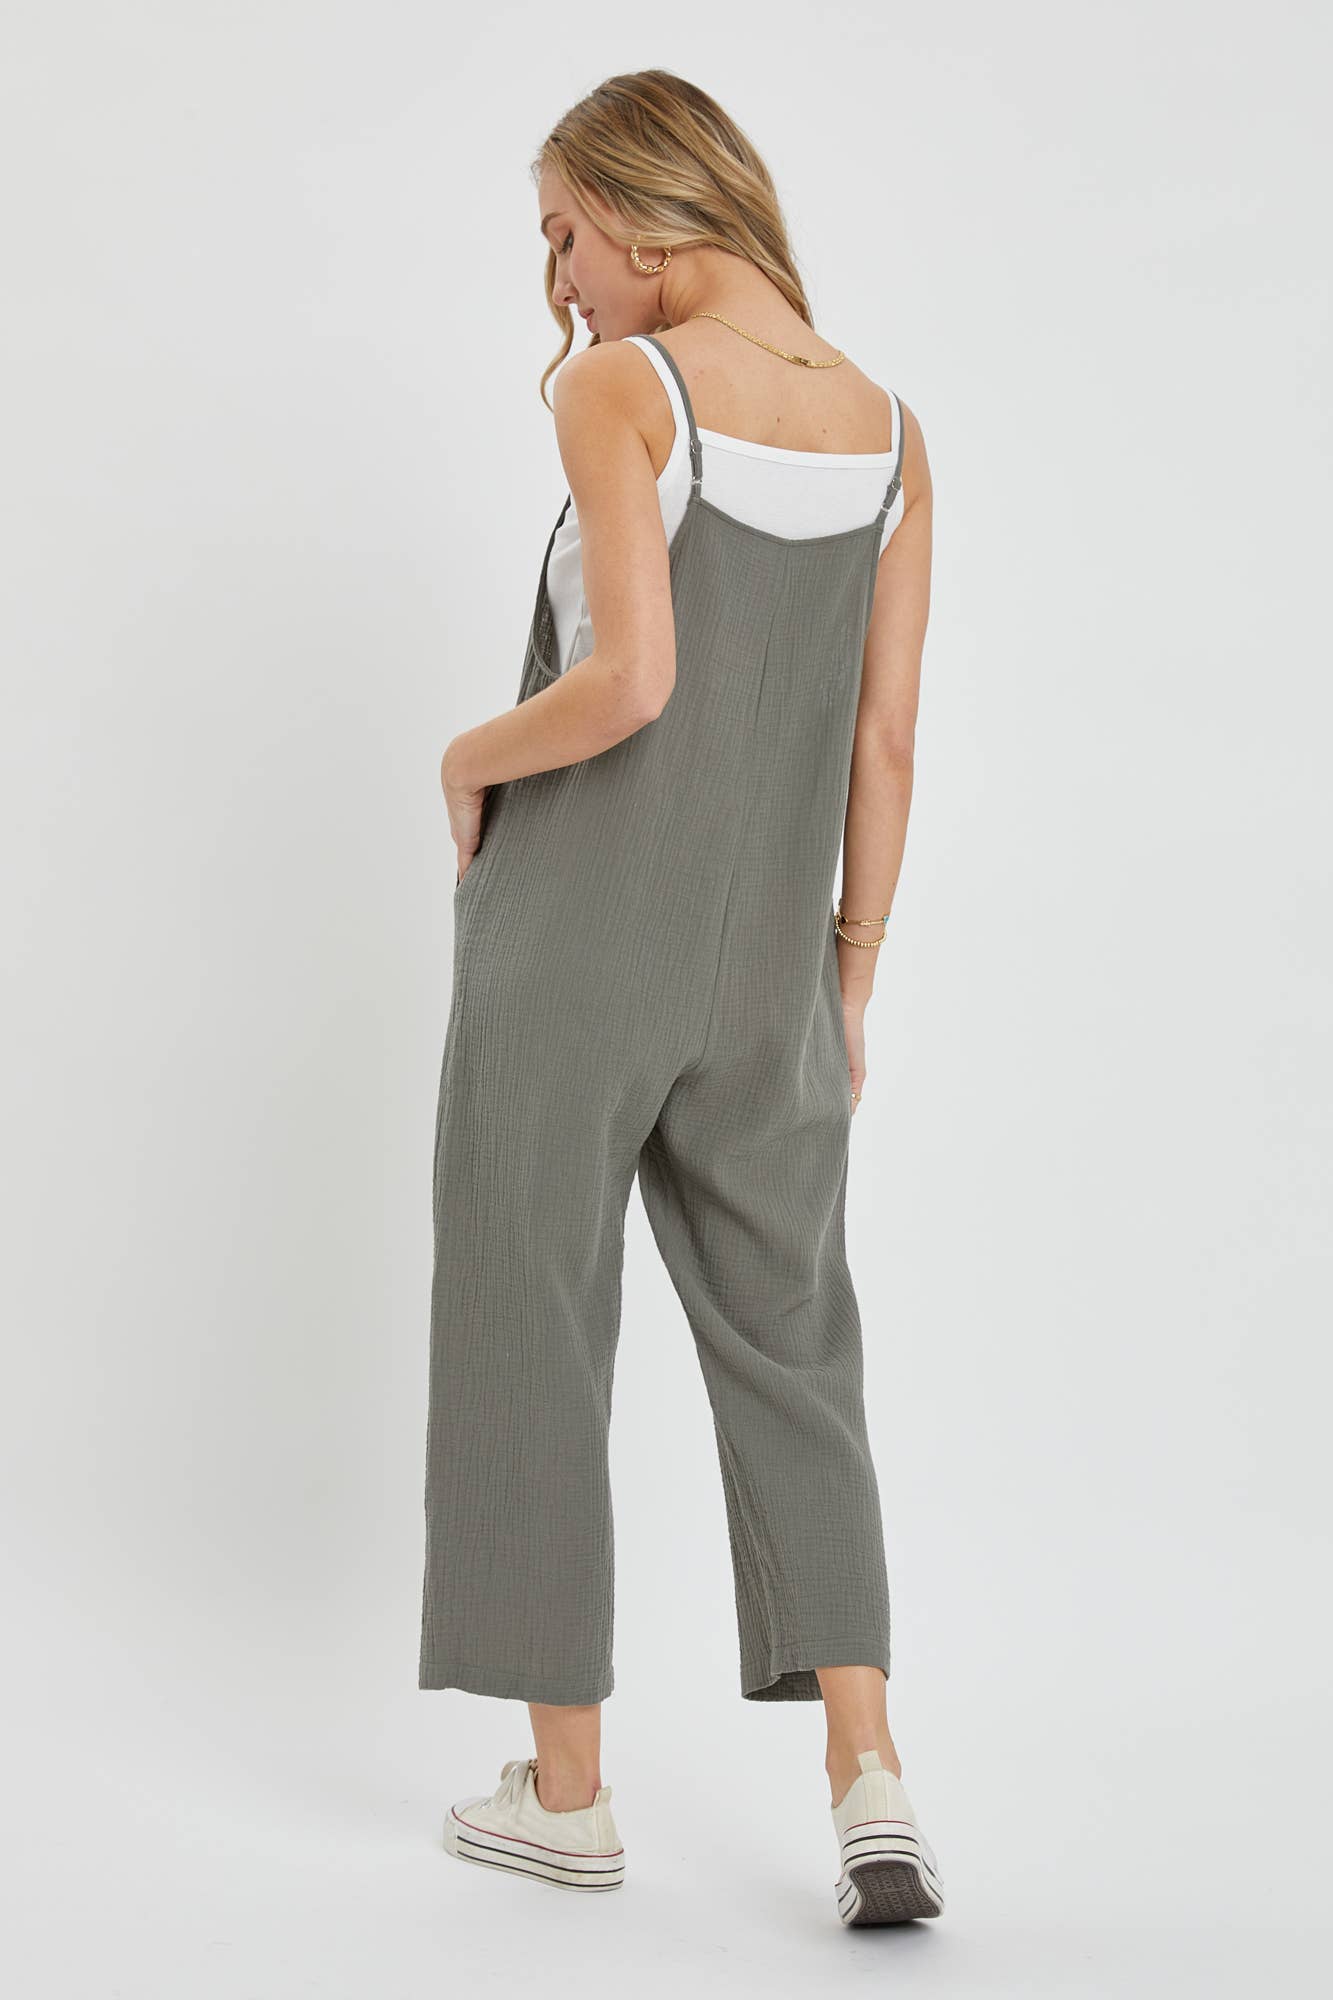 COTTON GAUZE SLEEVELESS JUMPSUIT IN OLIVE Spring-Summer Sweet Lovely by Jen